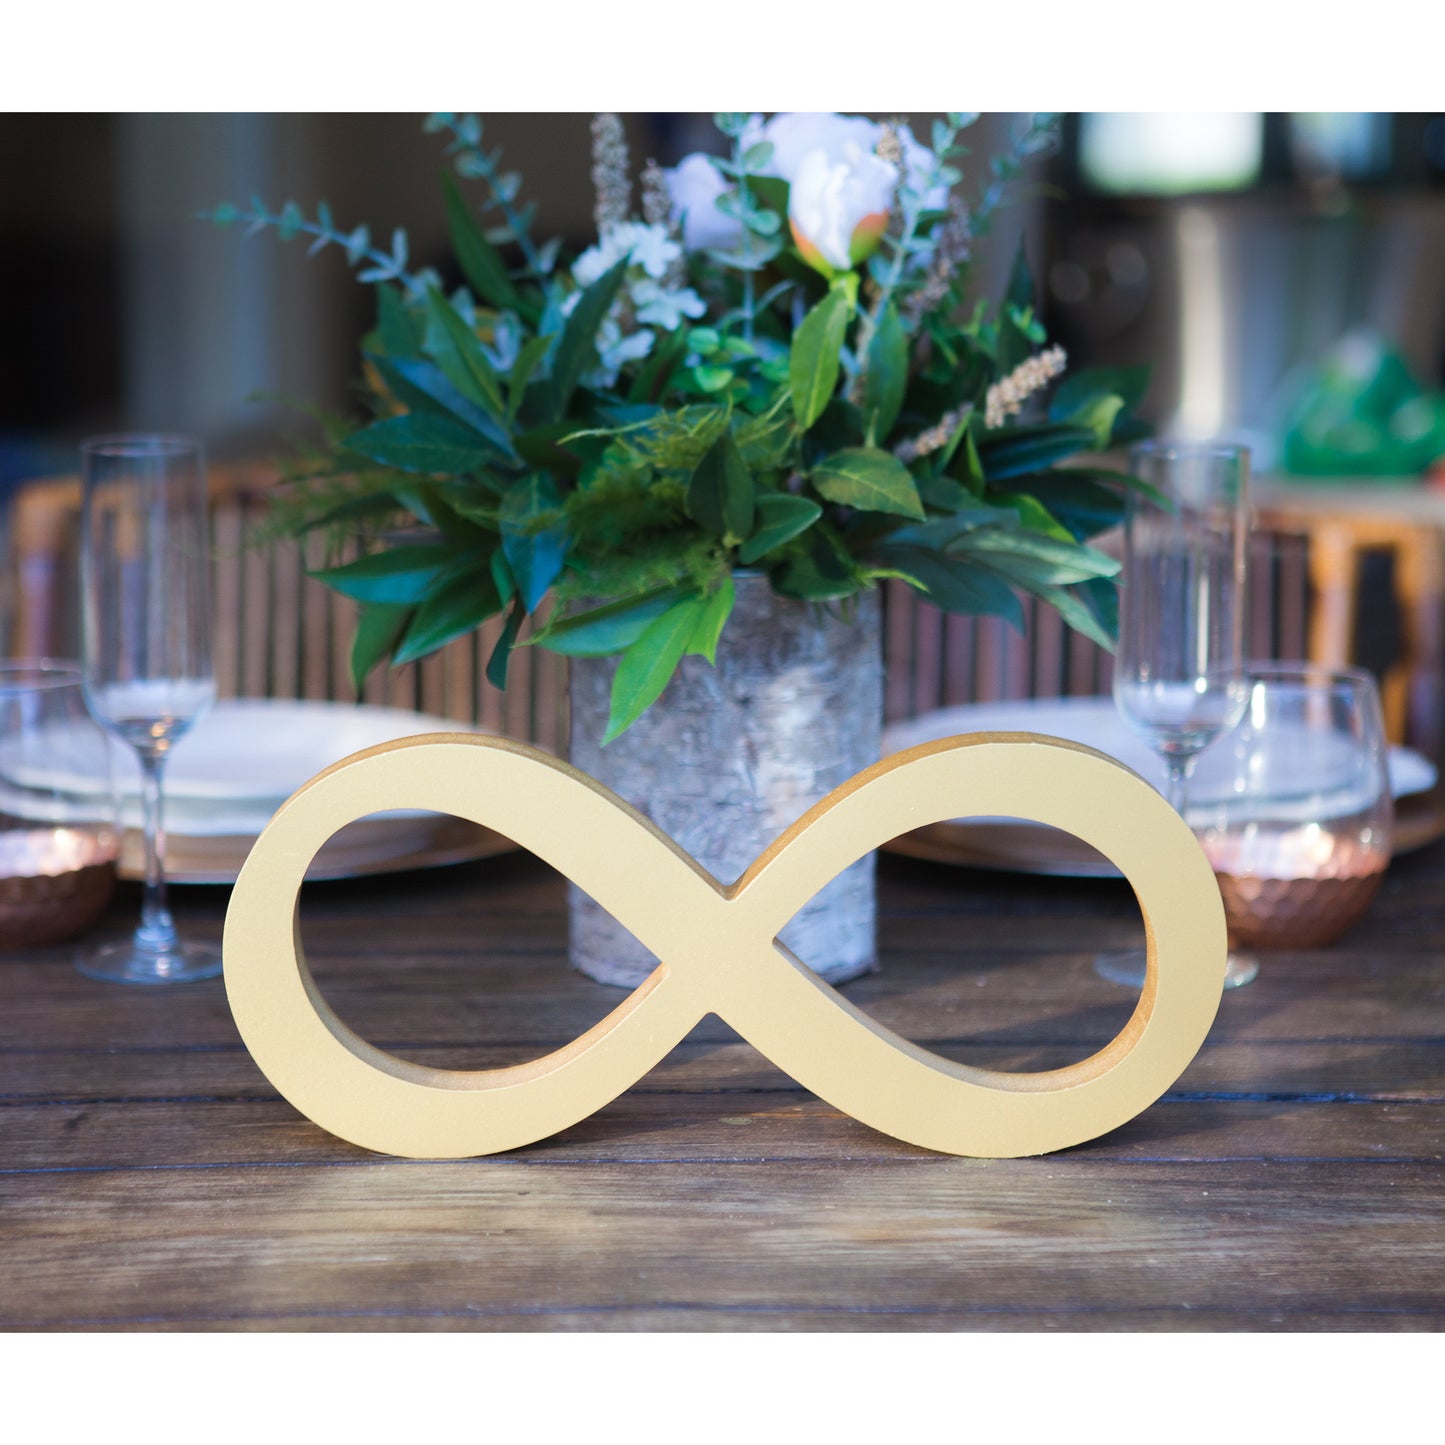 Infinity Table Sign for Wedding - Wedding Decor Gifts